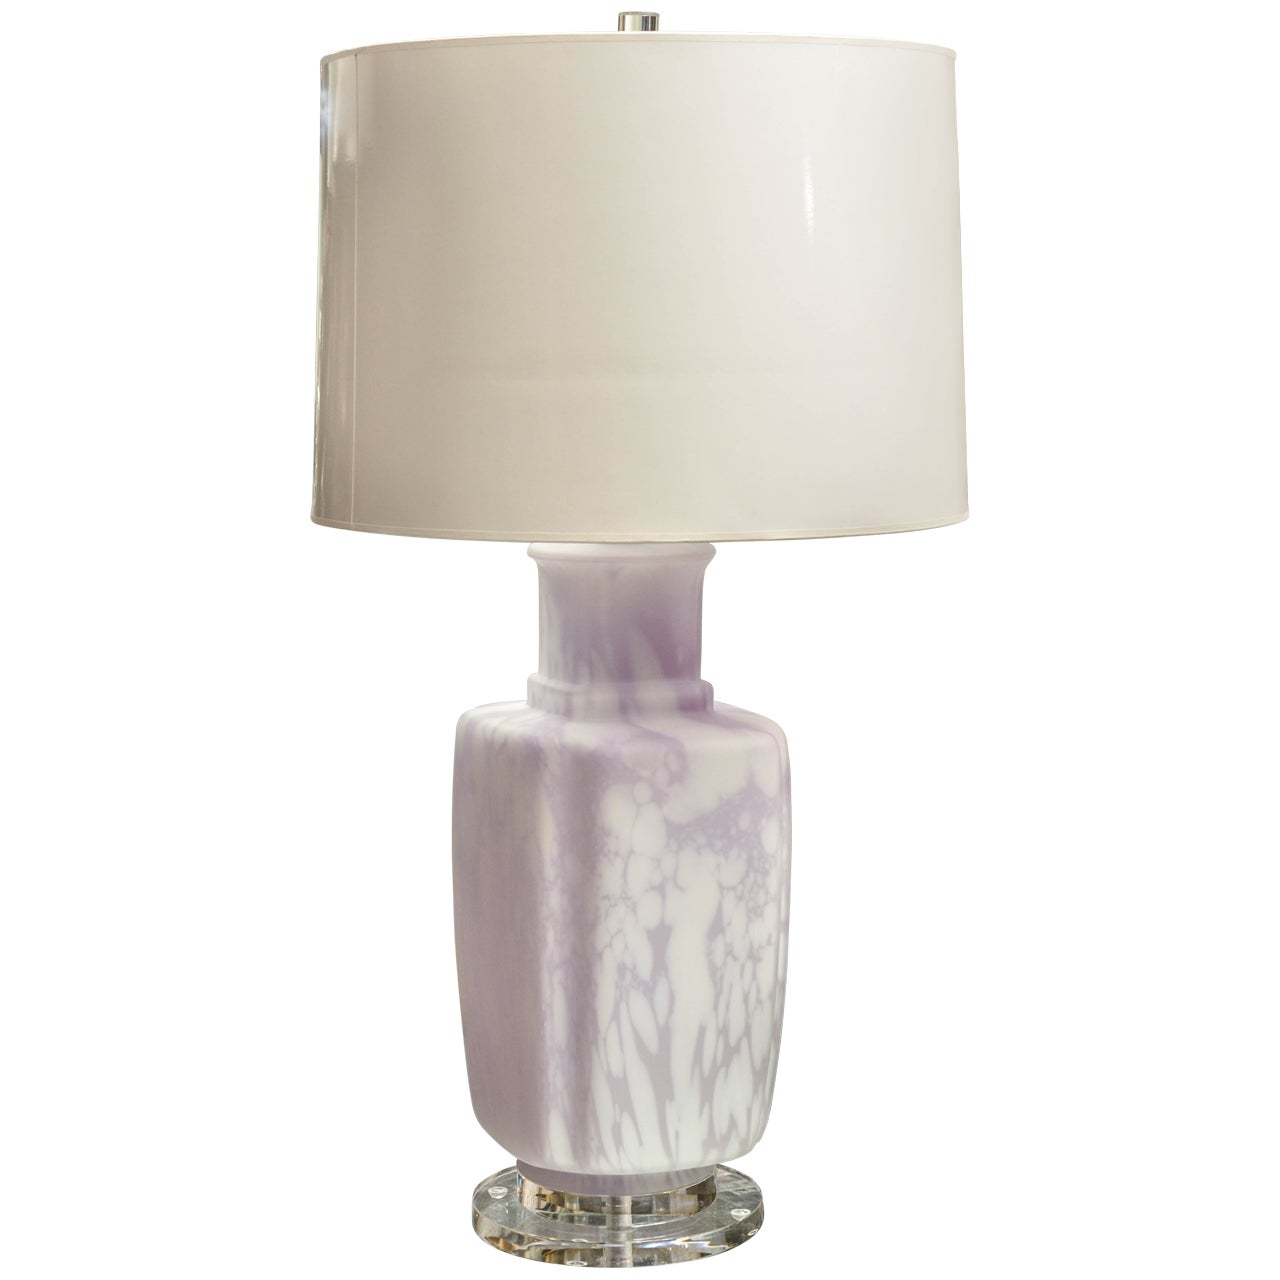 Striking and Unusual Mid-Century Lavender Murano Glass Table Lamp